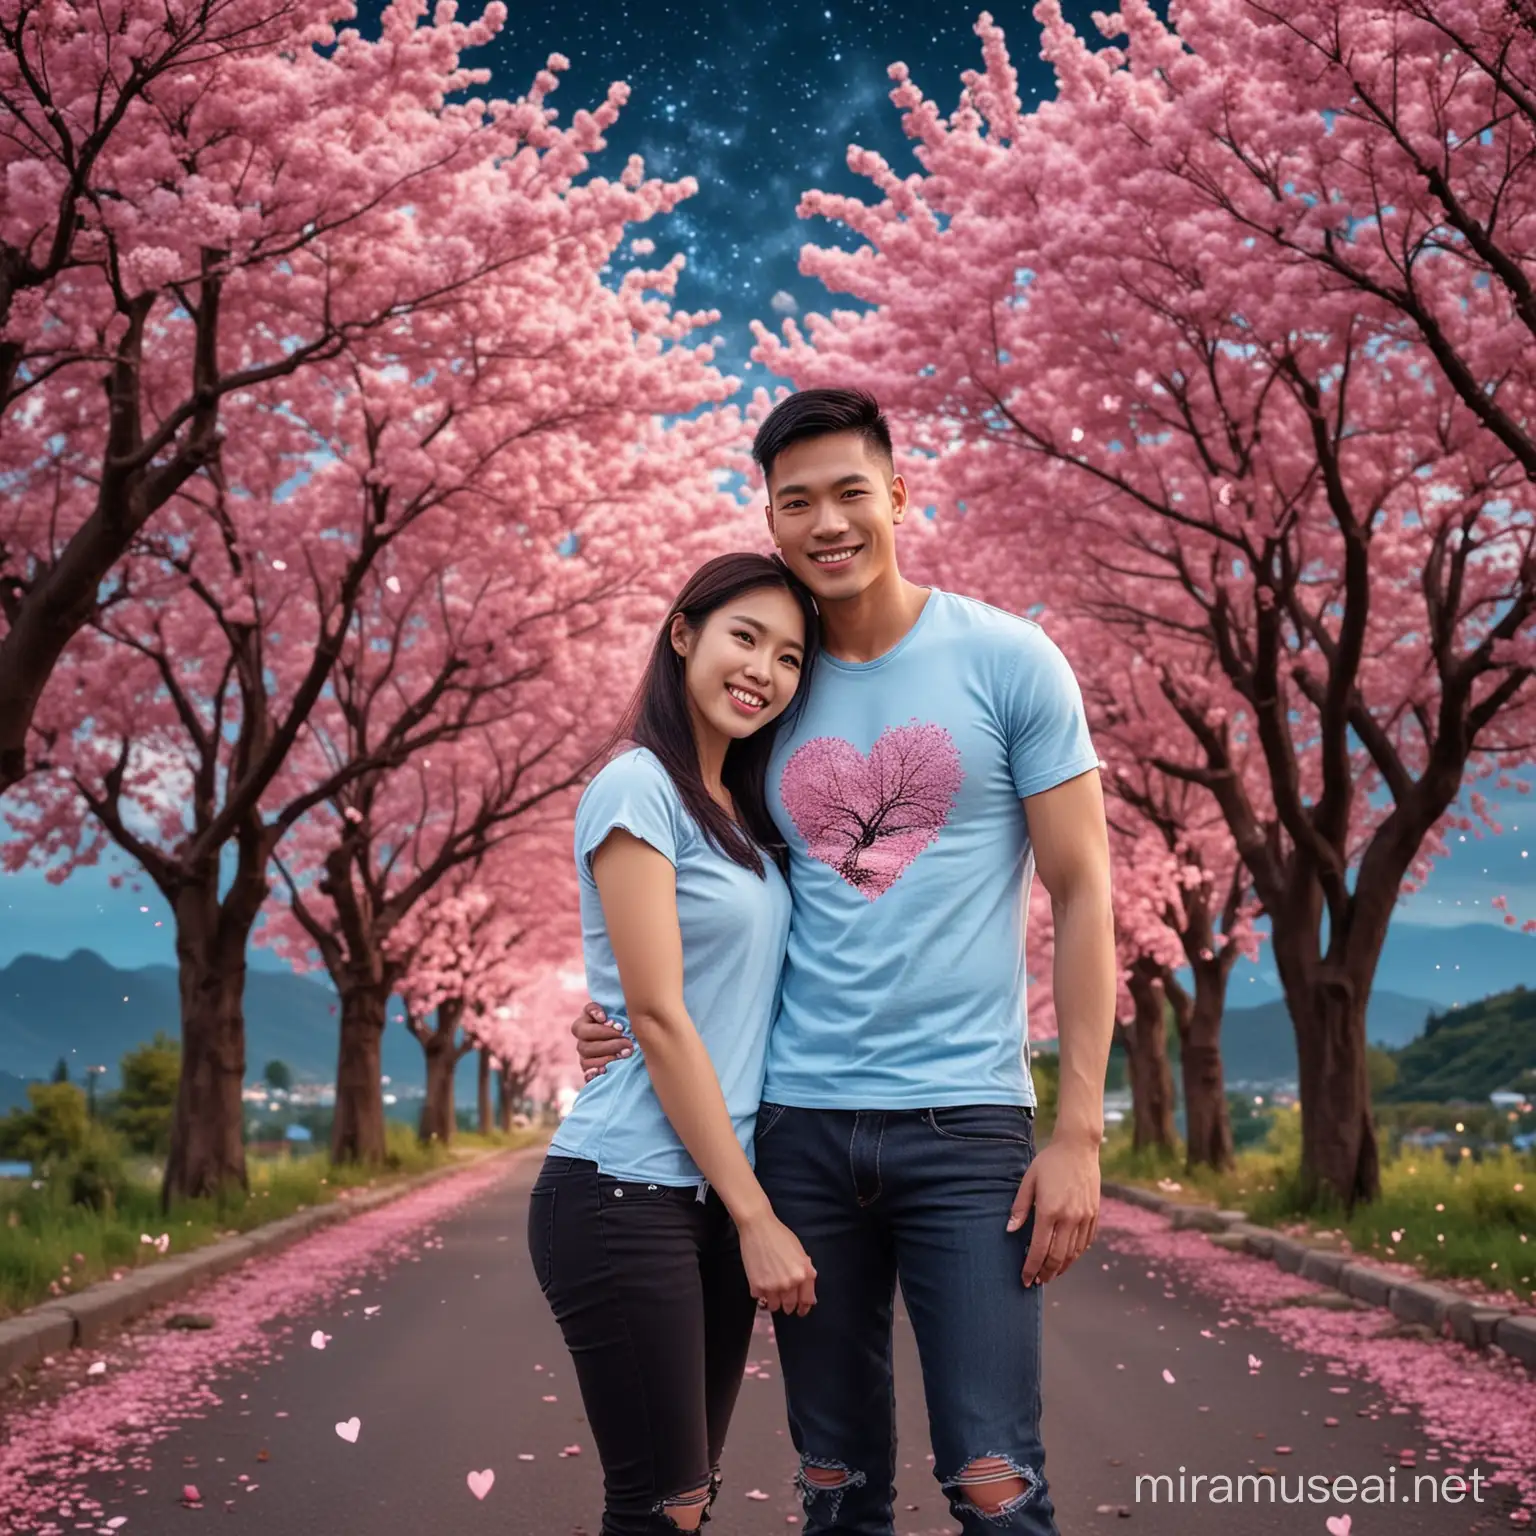 photography A couple of Asian men and women smiling faintly, wearing the same light blue t-shirt with a picture of a heart, the woman is carrying the man, facing each other, ripped black jeans, looking in a very romantic pose, the background is a road of pink cherry trees falling, mountains. the night sky is full of stars, UHD, ultra high quality